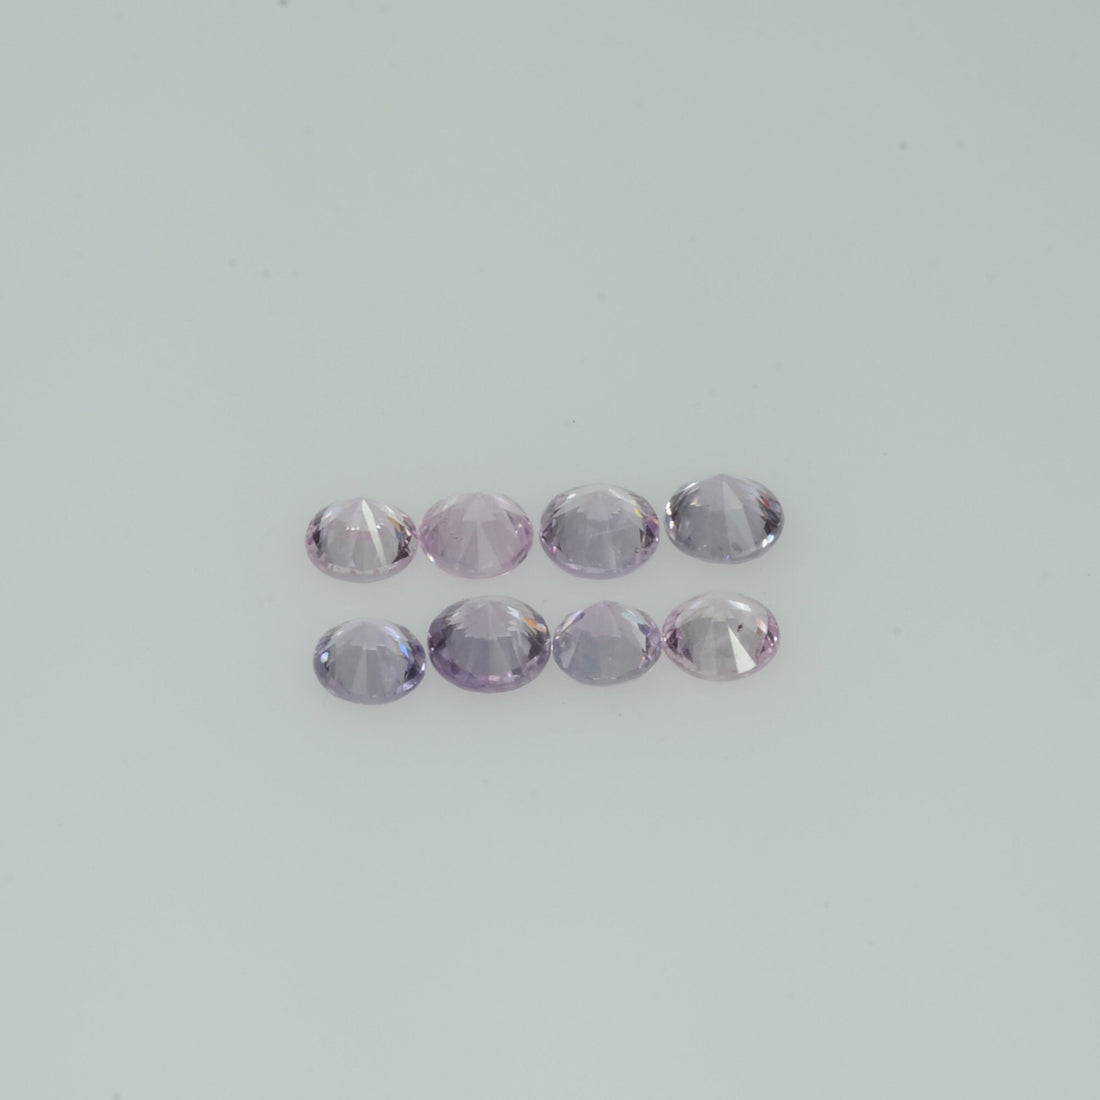 2.5-3.5 mm Natural Purple Pink Sapphire Loose Gemstone Round Diamond Cut Vs Quality A+ Color